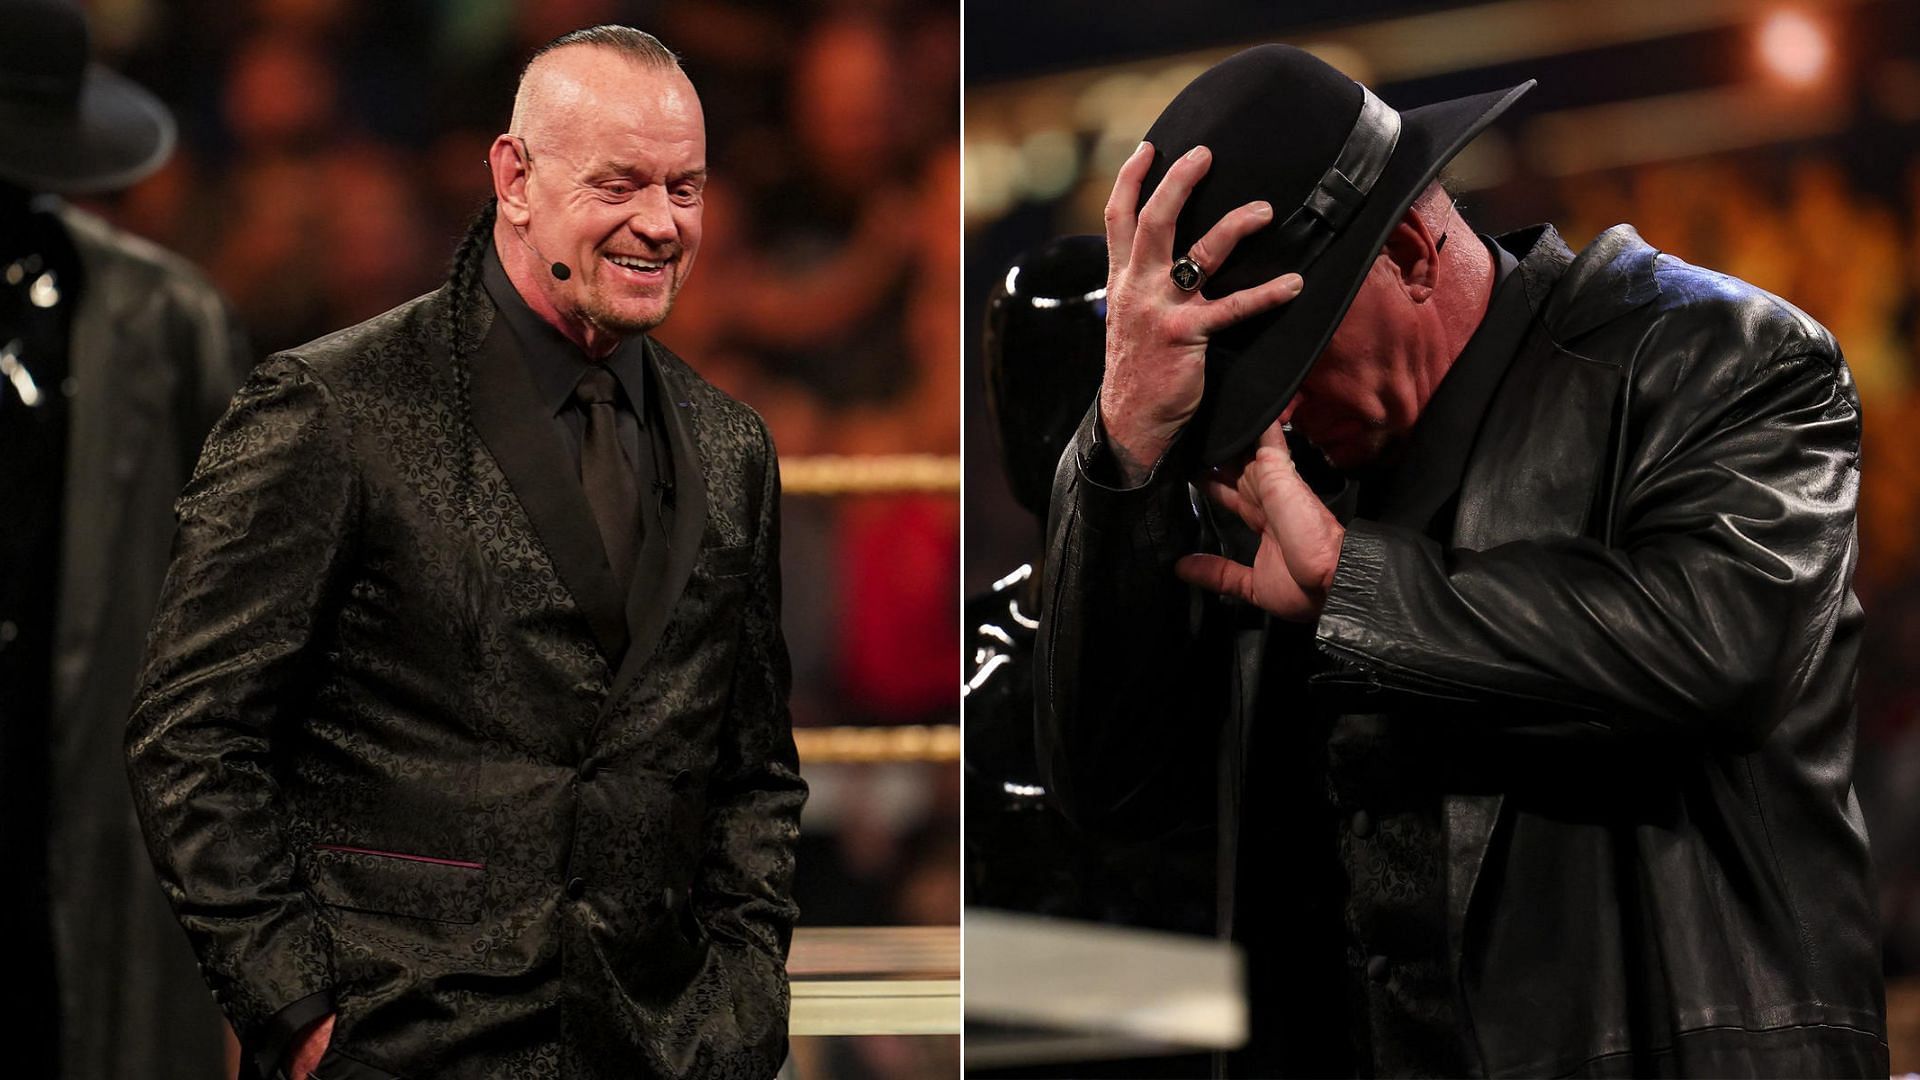 The Undertaker was least year